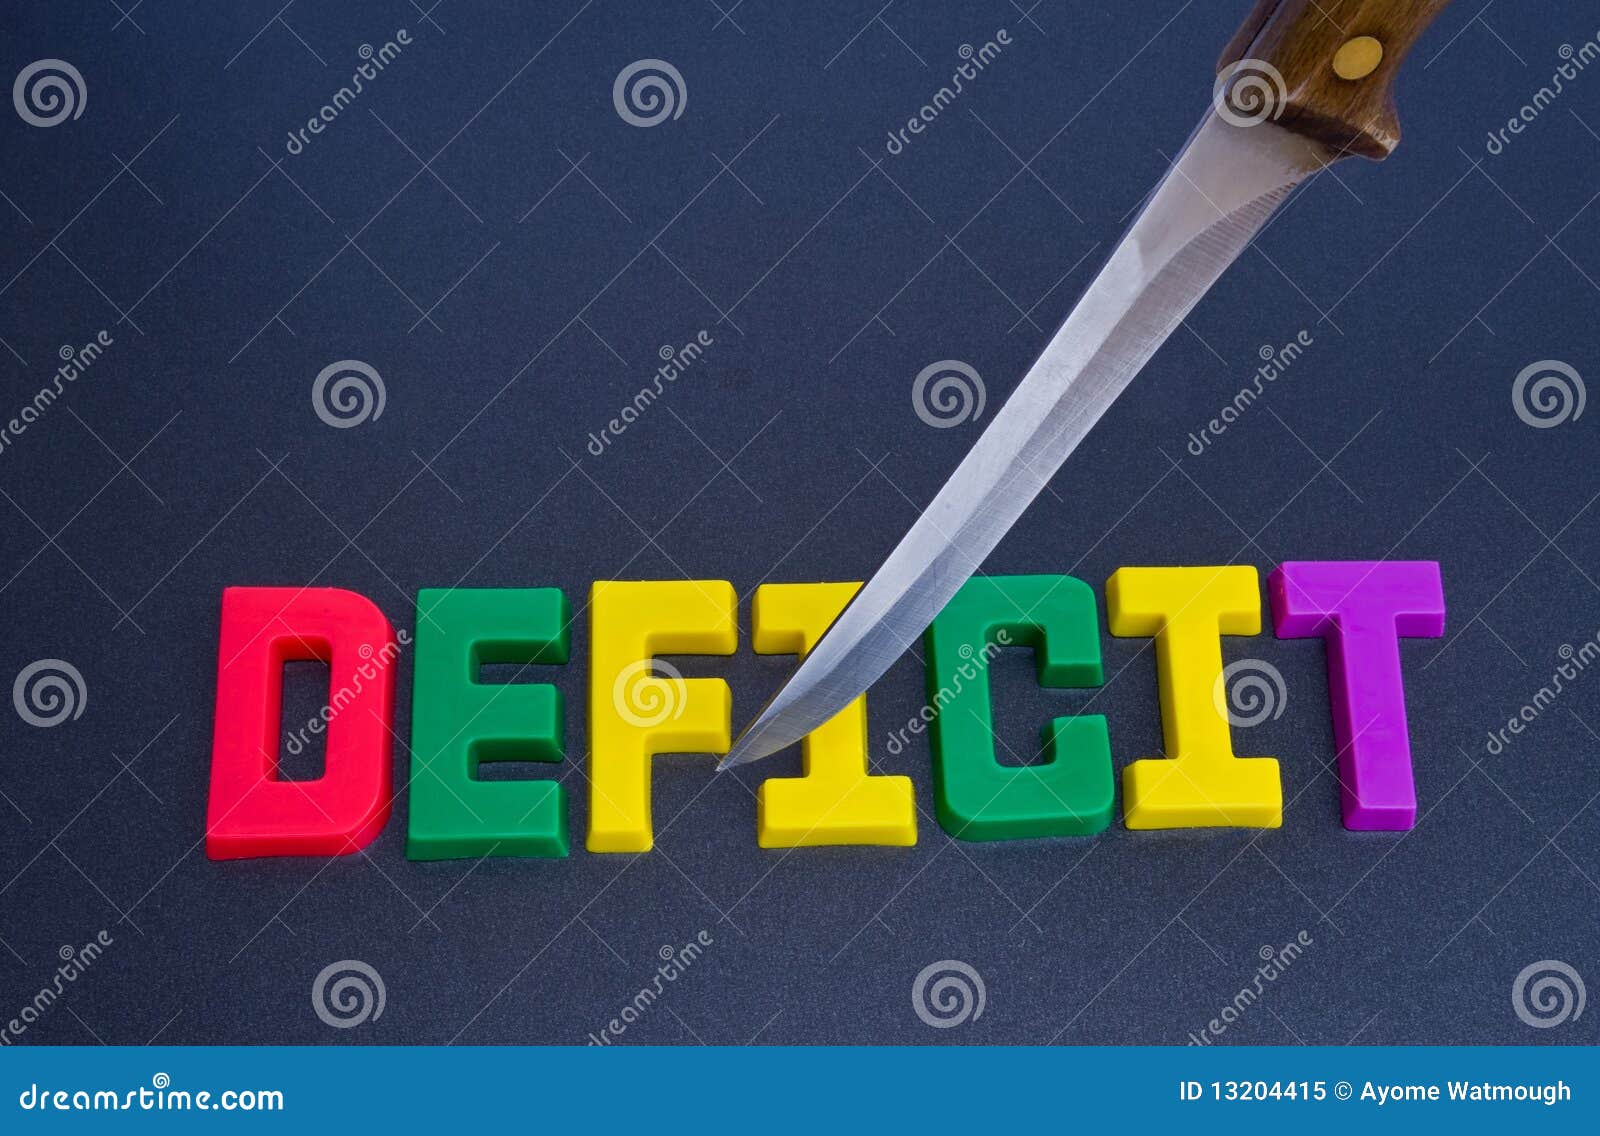 cutting the deficit: effect of recession.